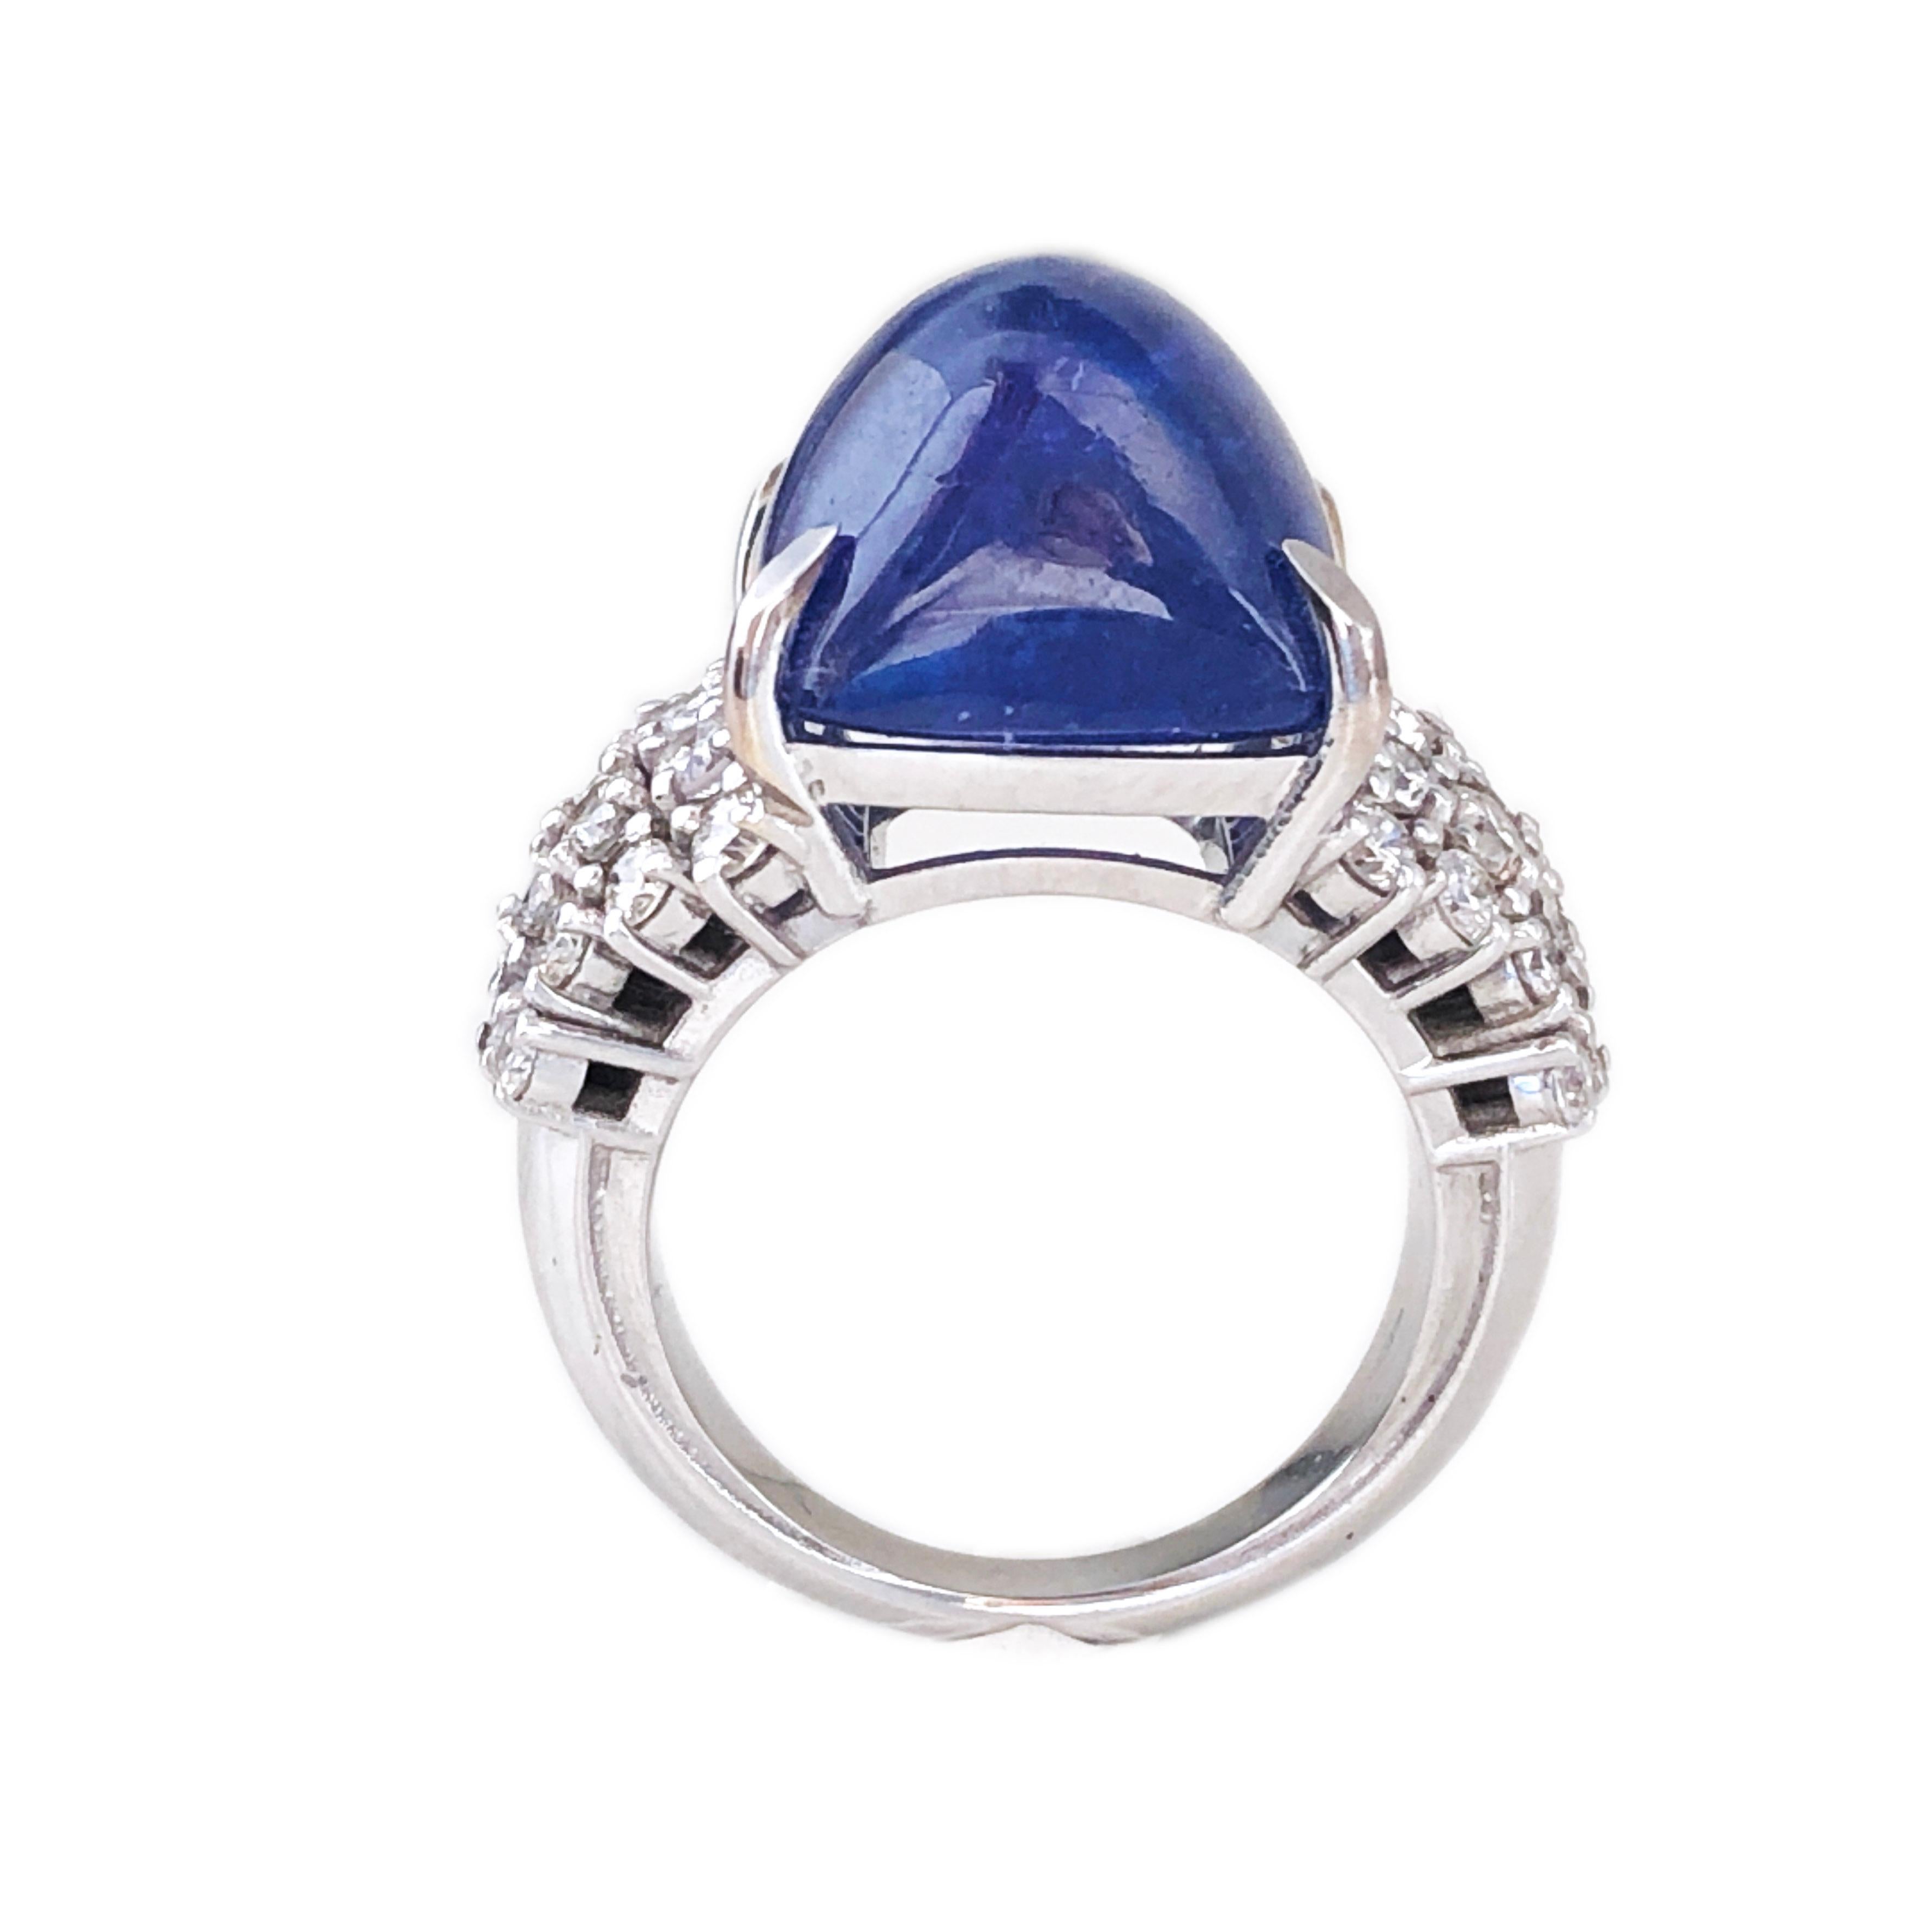 A Beautiful Natural 19.57 Carat Tanzanite Antik Cut Cabochon(about 0.511x0.60inches) in a Suptuous yet Timeless 32 White Diamond(1.61 Carat, G-H, Vvs1) 18k White Gold Setting Cocktail Ring.
A detailed gemological certicate will be included.
In our